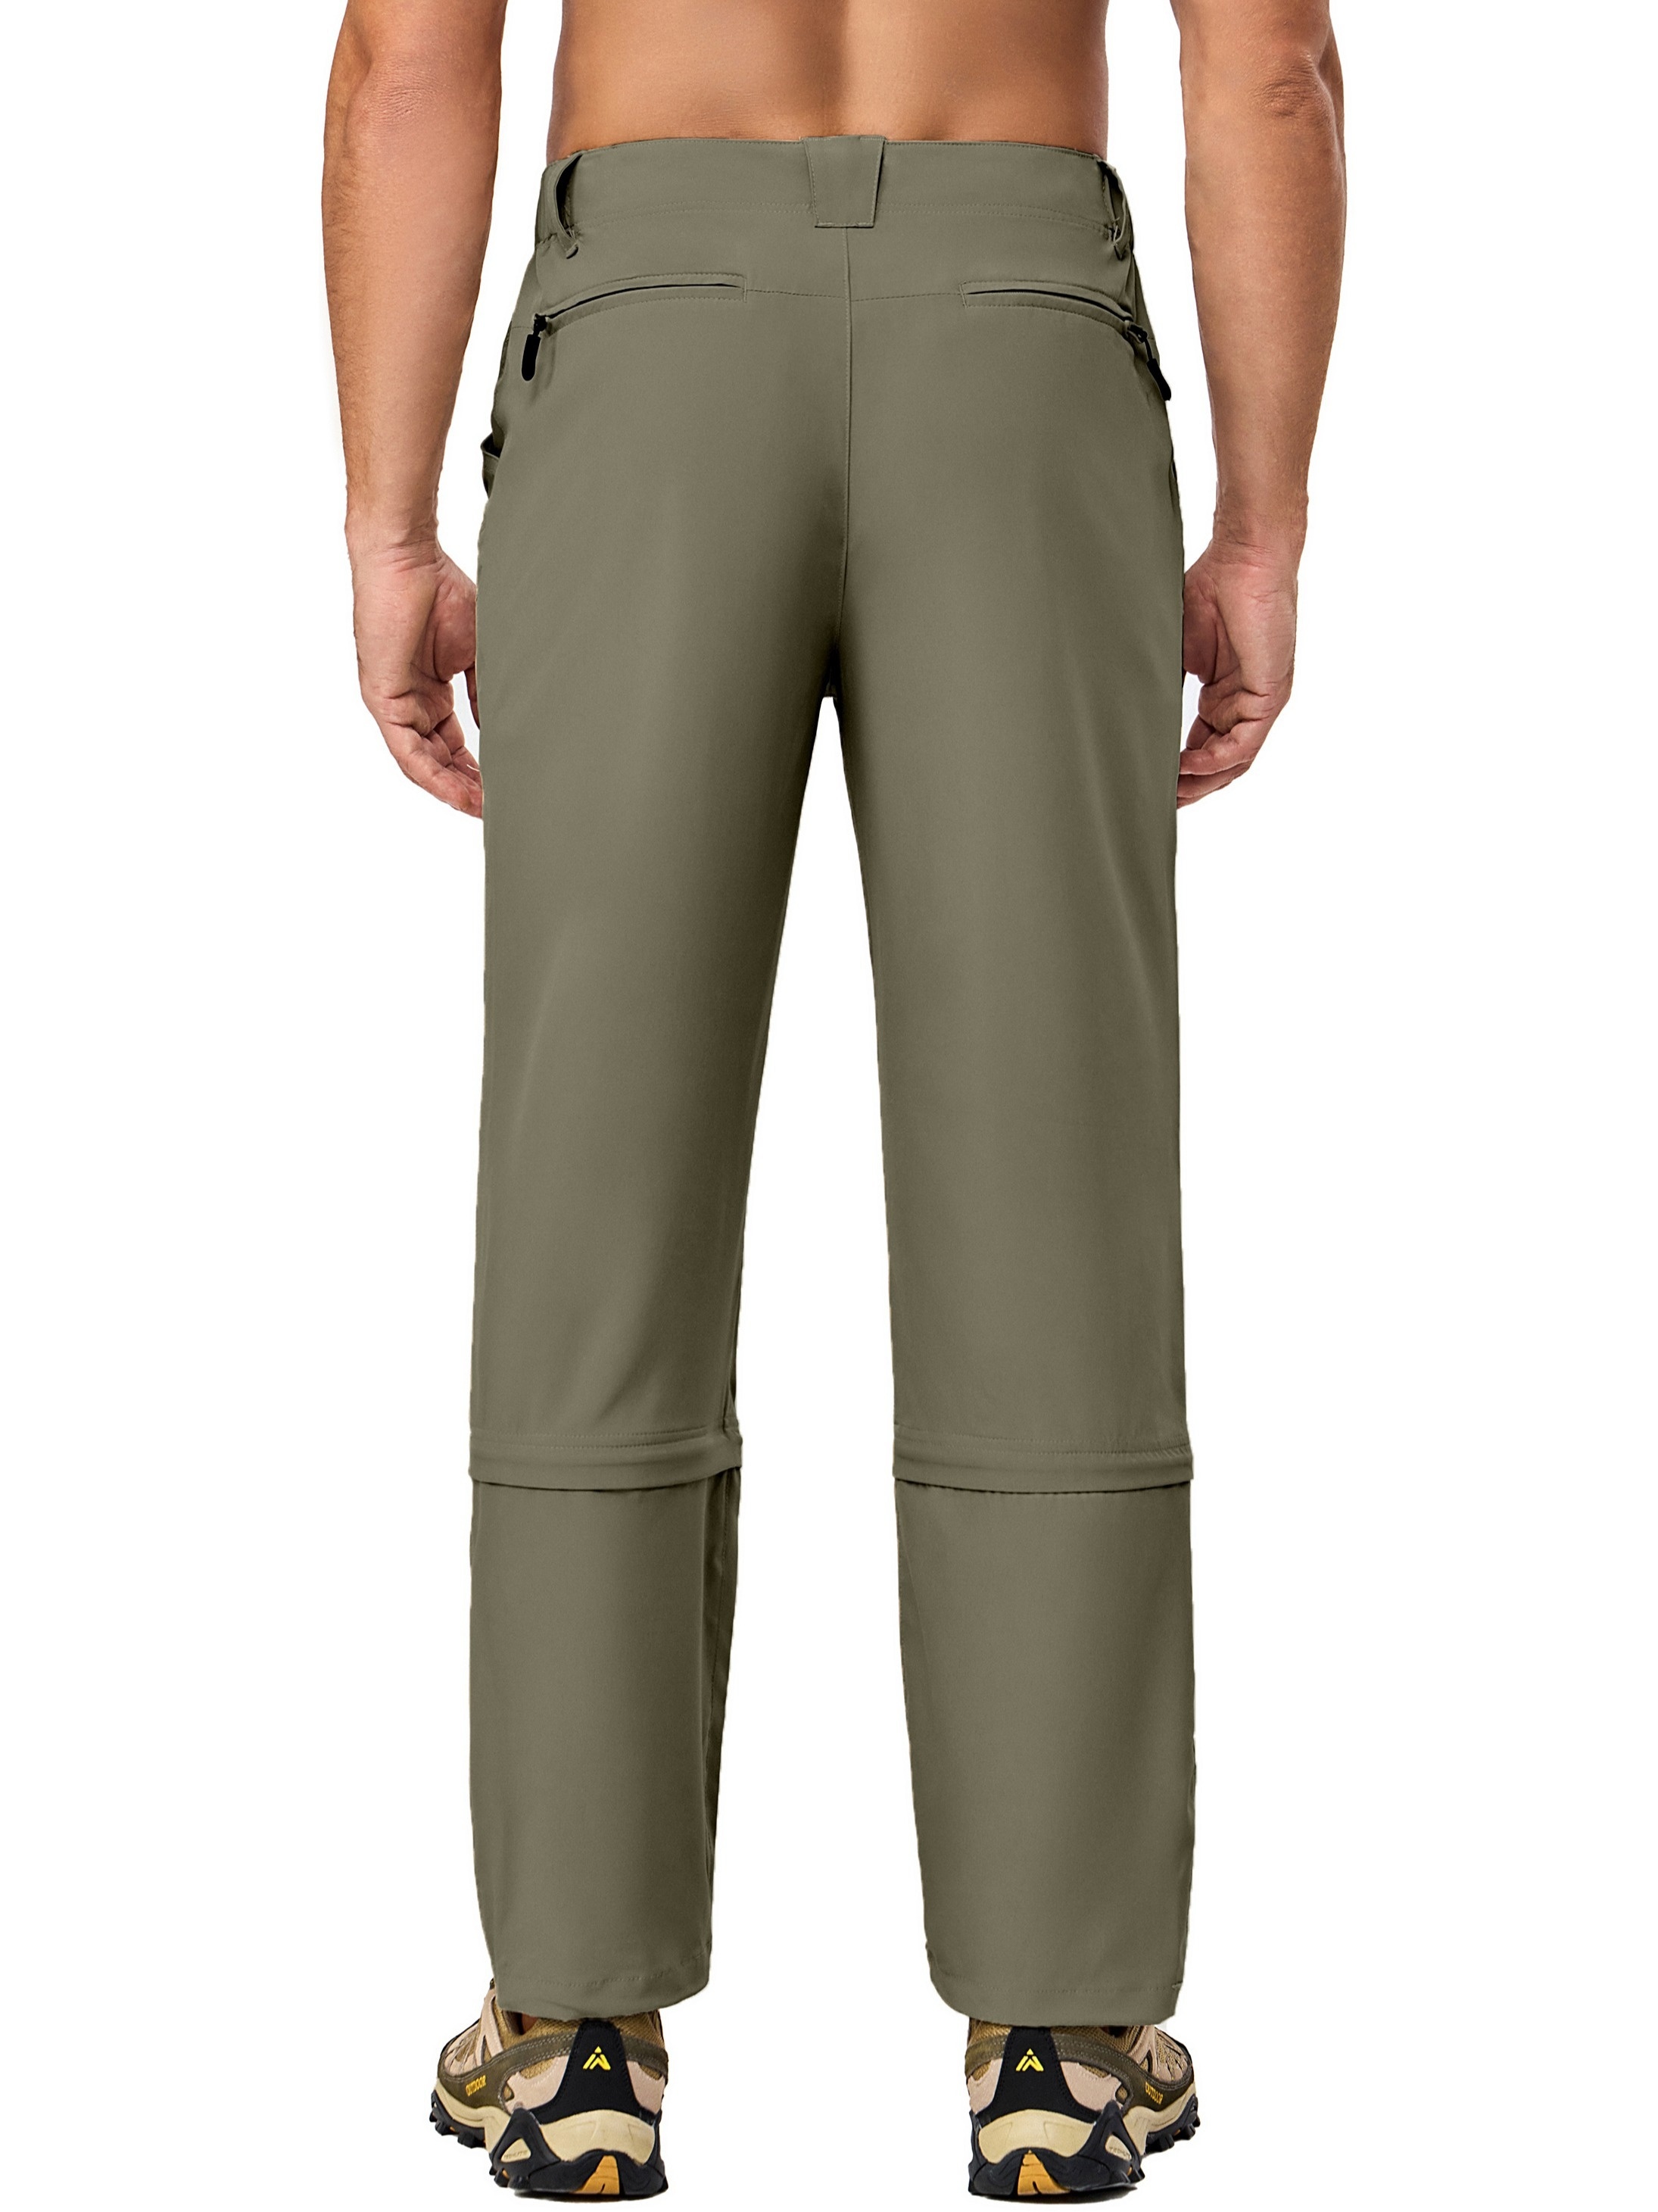 Men's Convertible Hiking Pants, Quick Dry Lightweight Zip Off Breathable Cargo Pants for Outdoor, Fishing, Safari,Temu